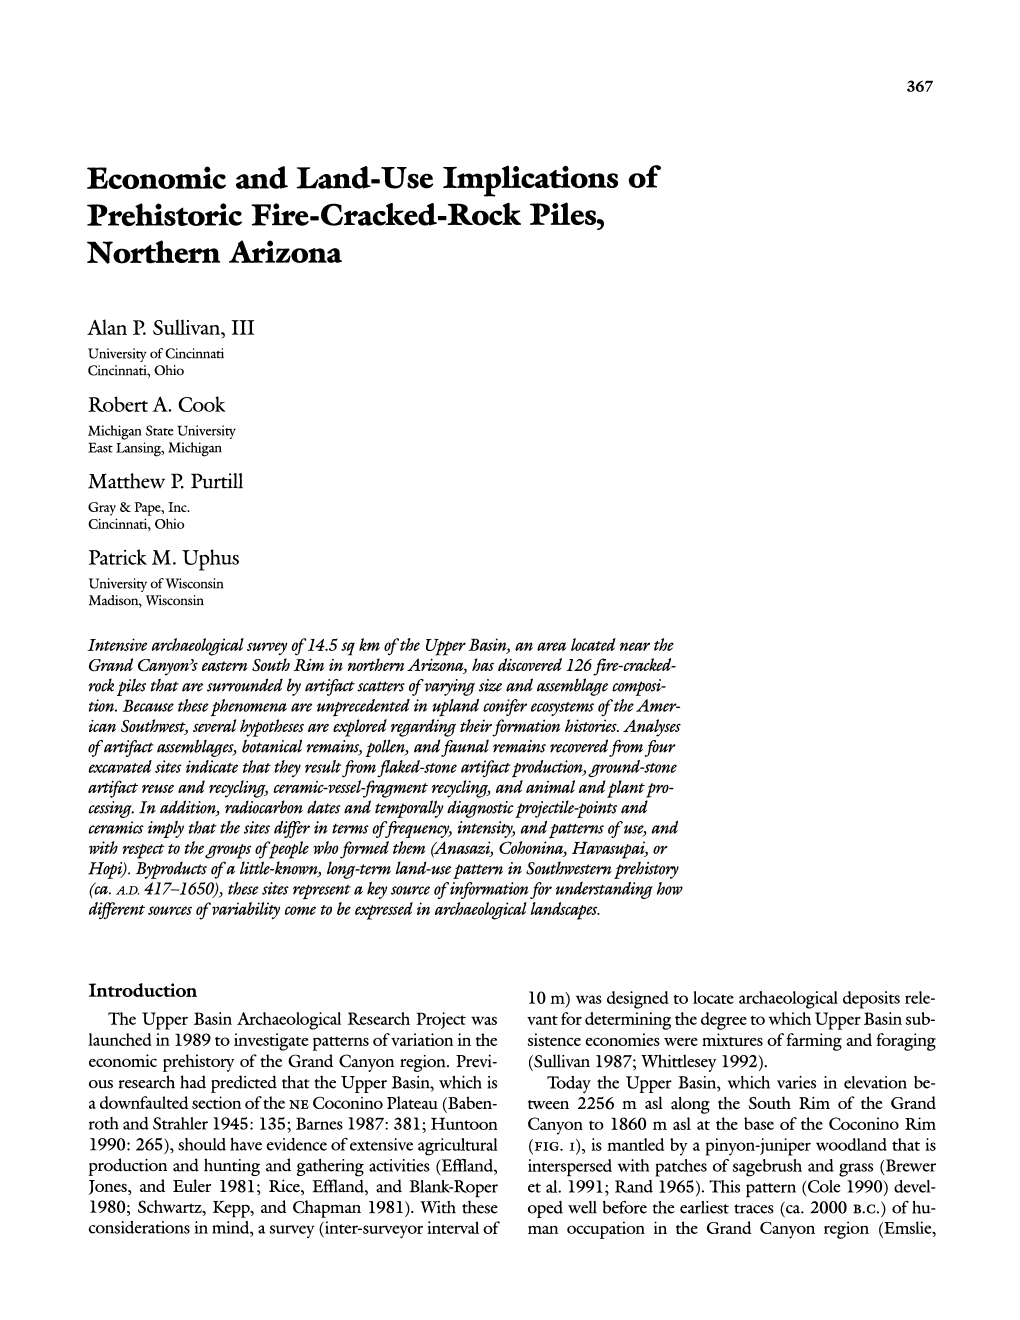 Economic and Land-Use Implications of Prehistoric Fire-Cracked-Rock Piles, Northern Arizona